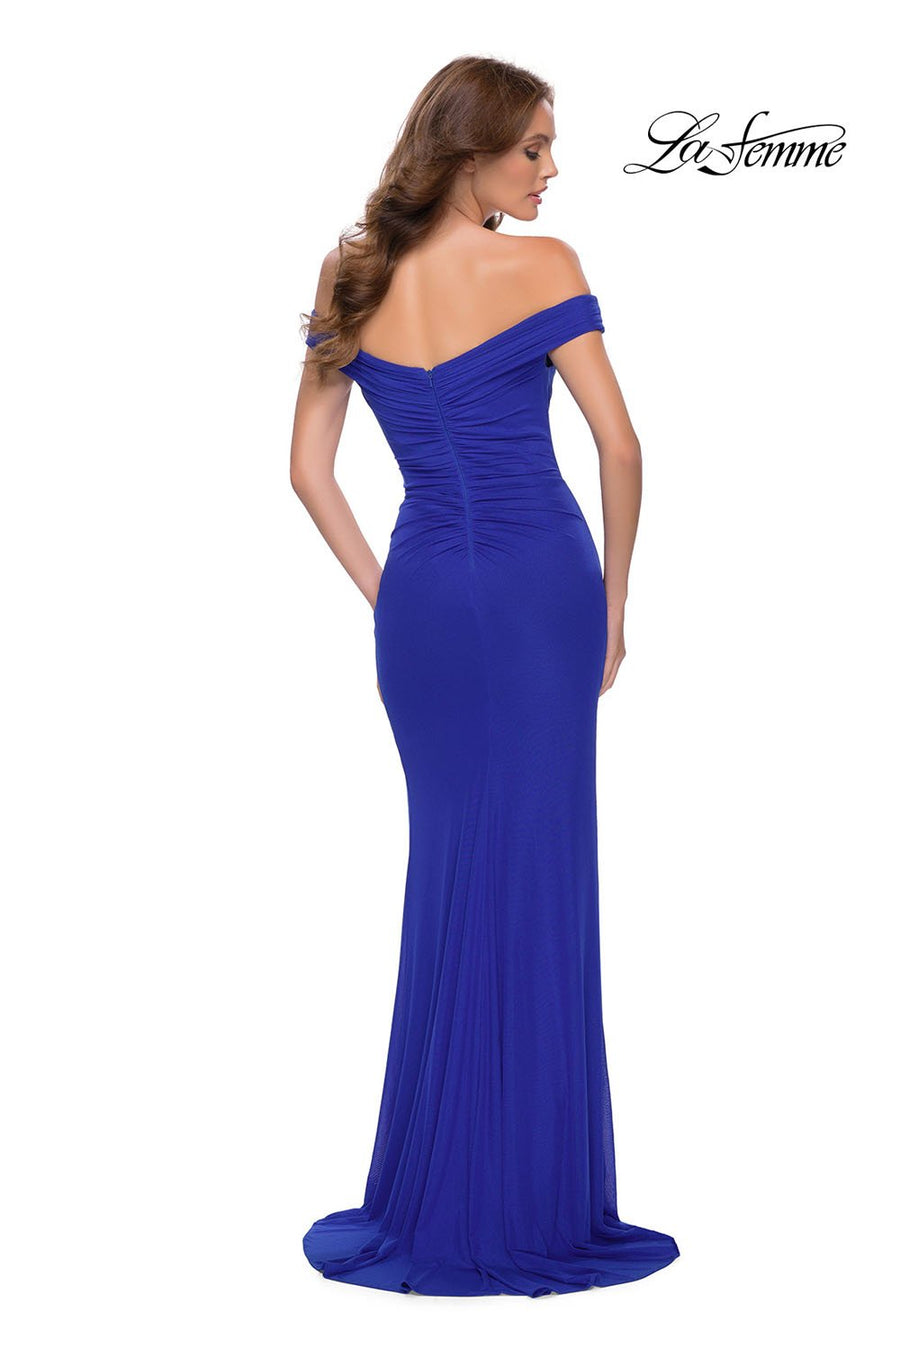 La Femme 29756 prom dress images.  La Femme 29756 is available in these colors: Black, Dark Emerald, Royal Blue.